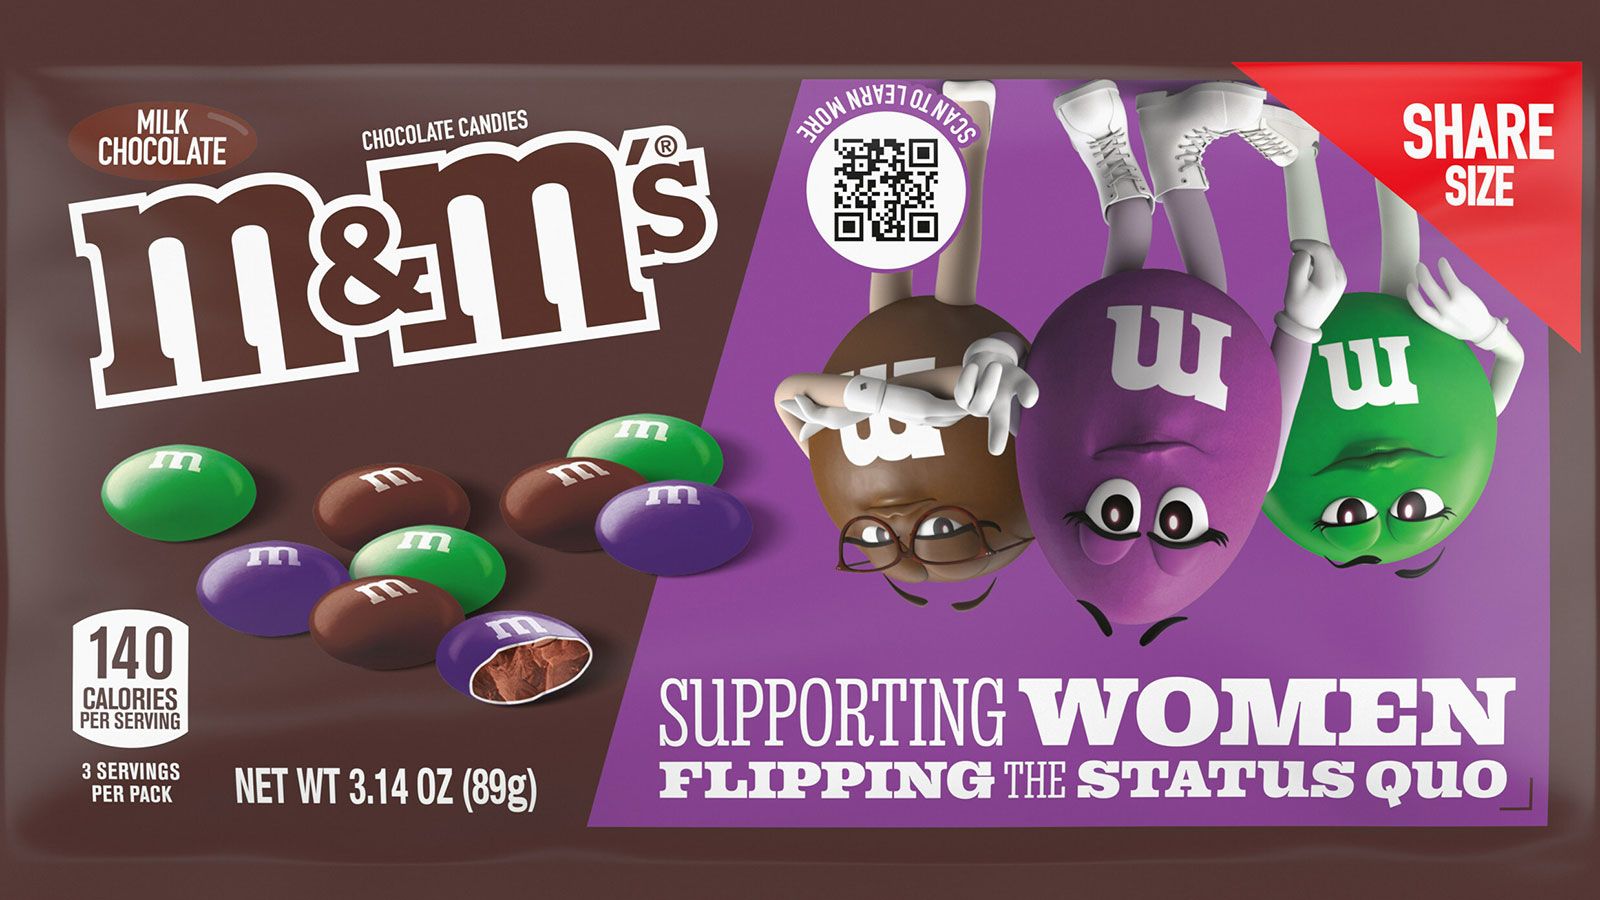 M&M's Redesigned Their Characters For The First Time In 10 Years